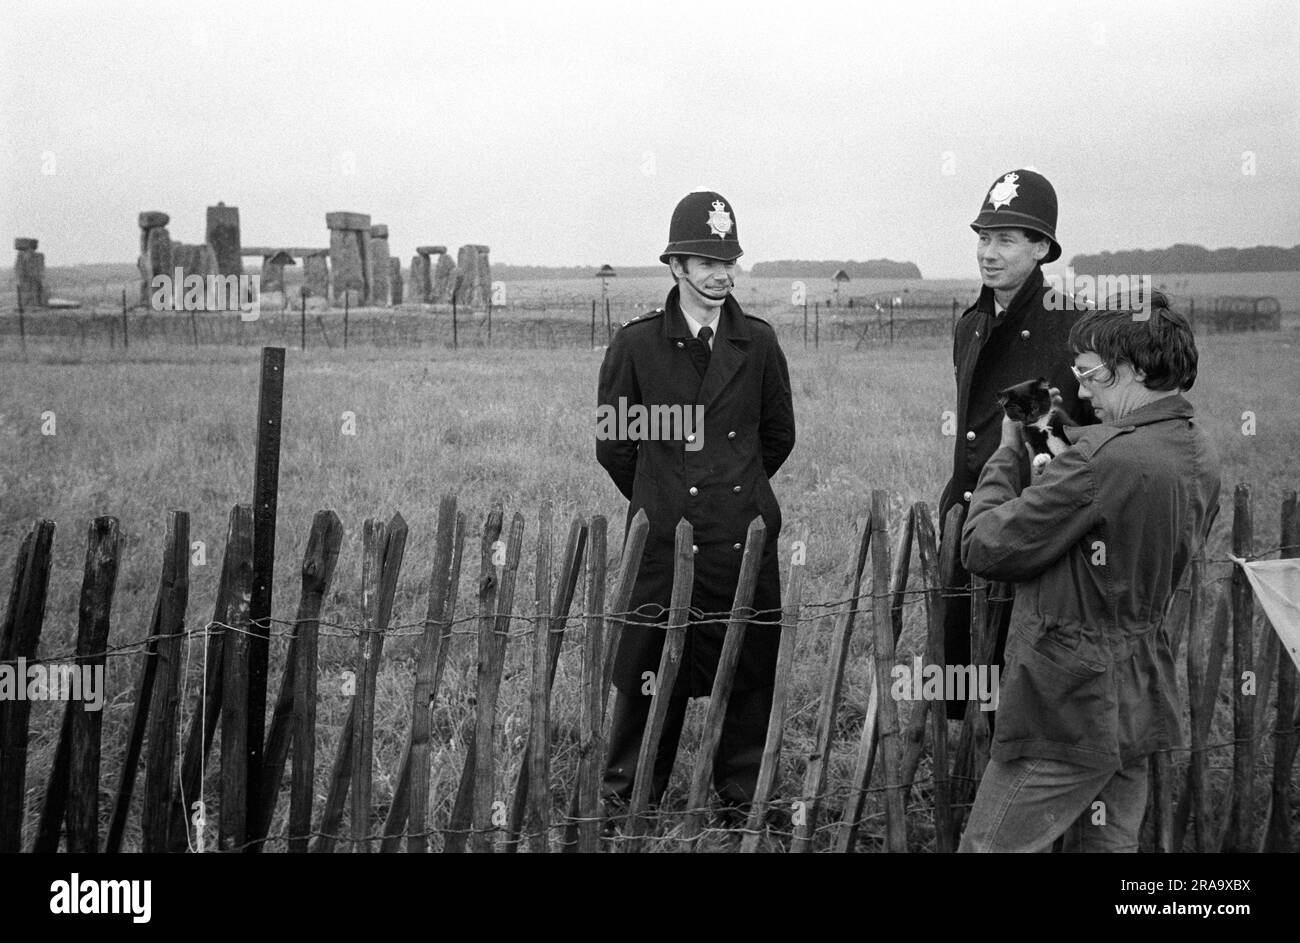 Stonehenge Free Festival at the summer solstice, Wiltshire, England circa June 1976. The stone circle out of bounds, two policeman talk to a festival goer who's holding her pet cat. 1970s UK HOMER SYKES Stock Photo